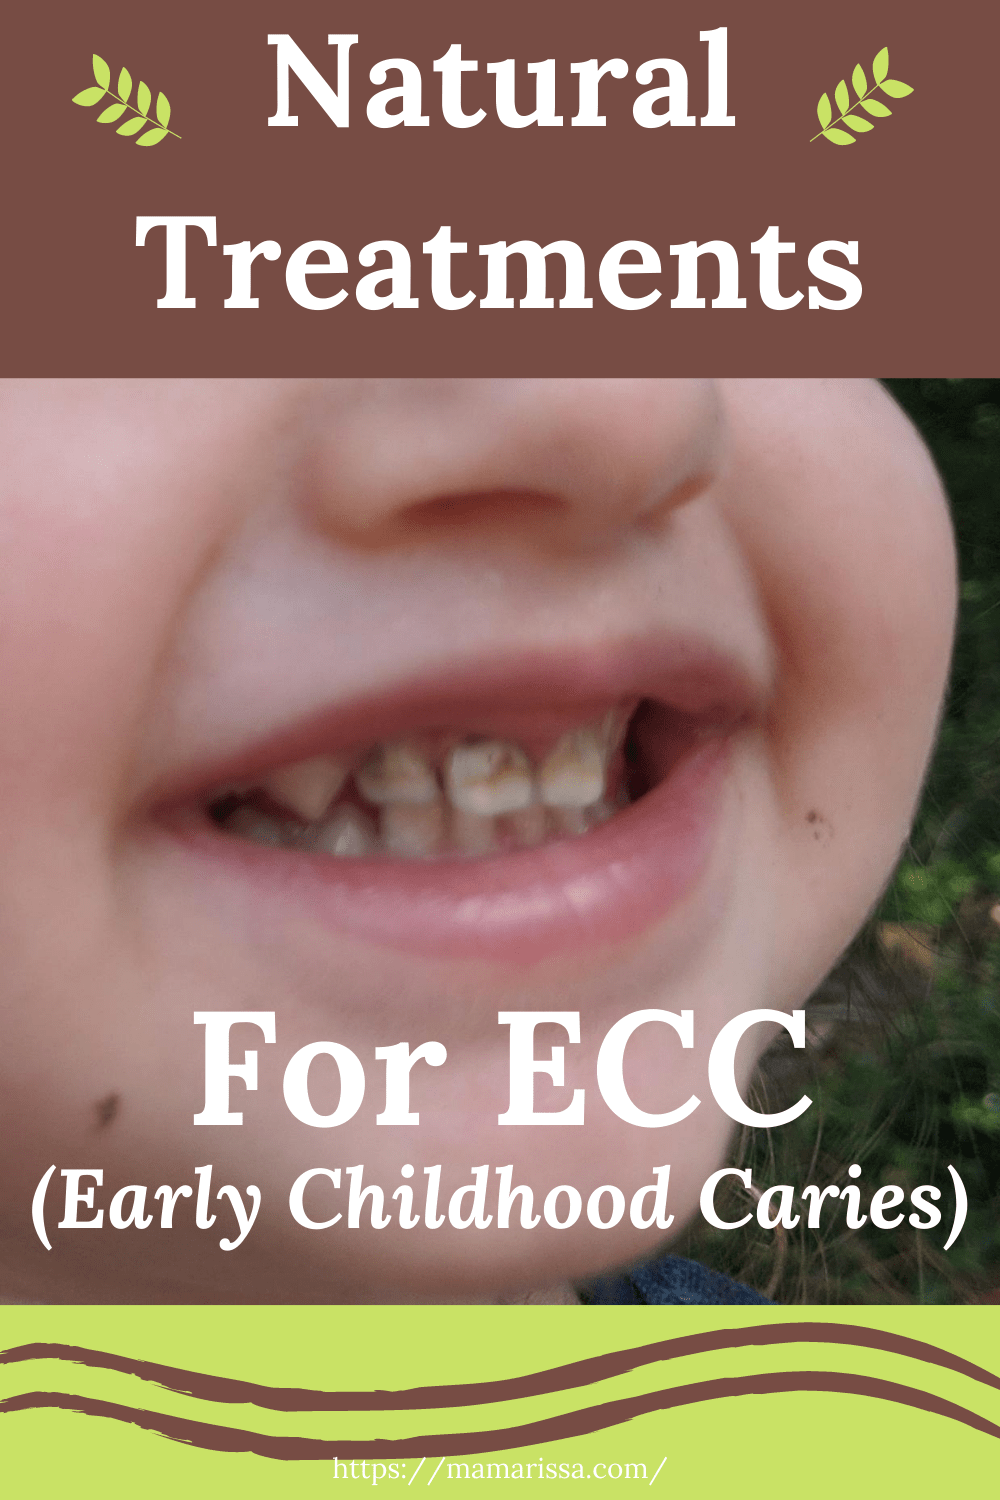 Natural Treatments for ECC (Early Childhood Caries)